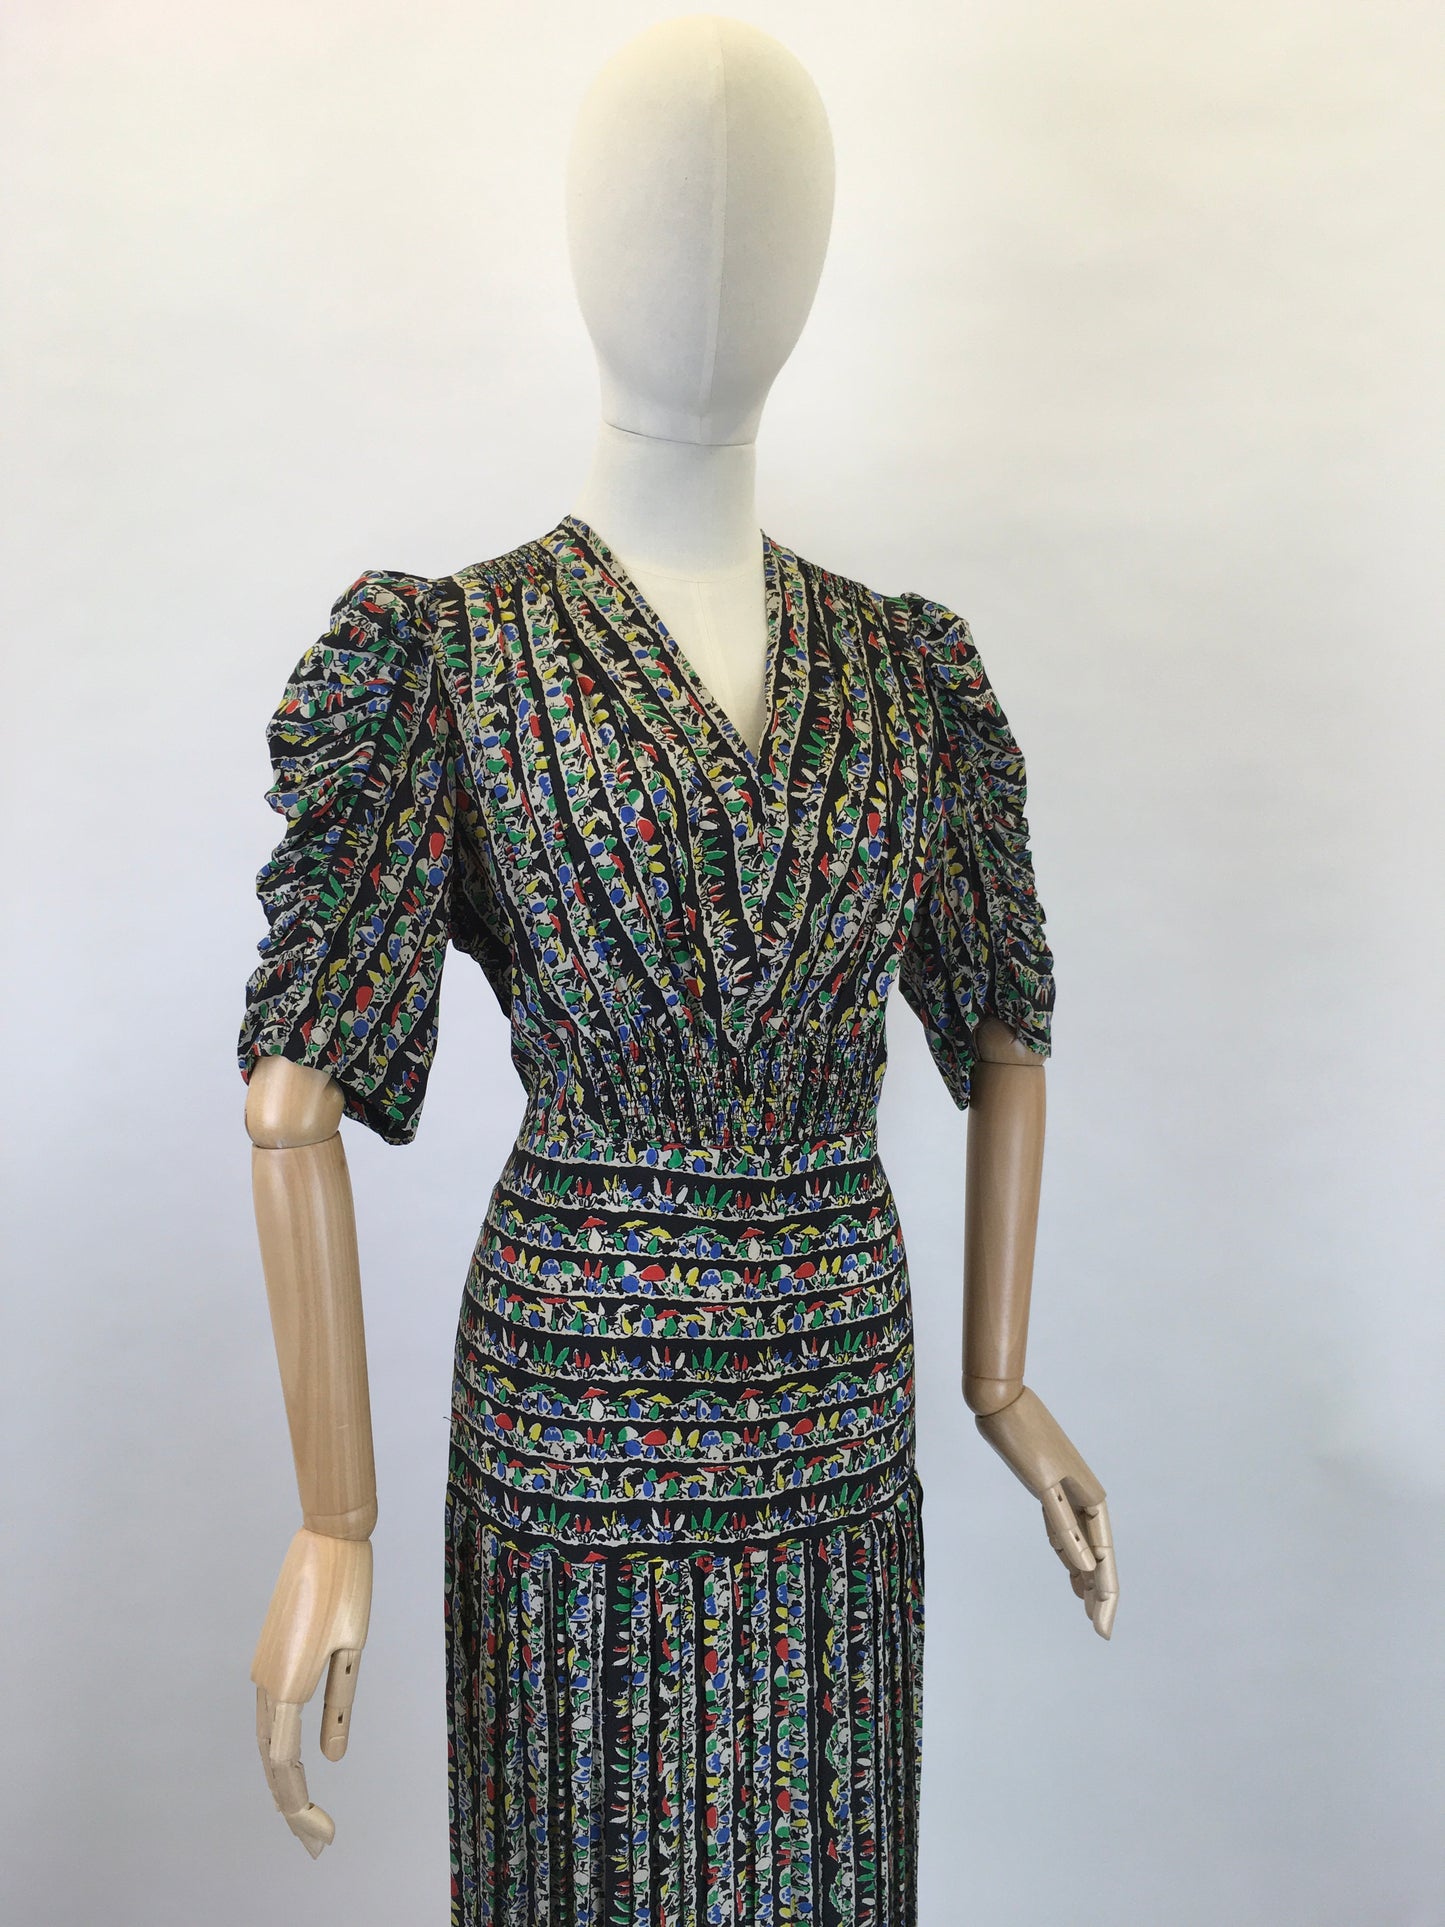 Original 1930s STUNNING Novelty Print Dress - Featuring Toadstools I’m Primary Reds, Yellows, Blues and Greens